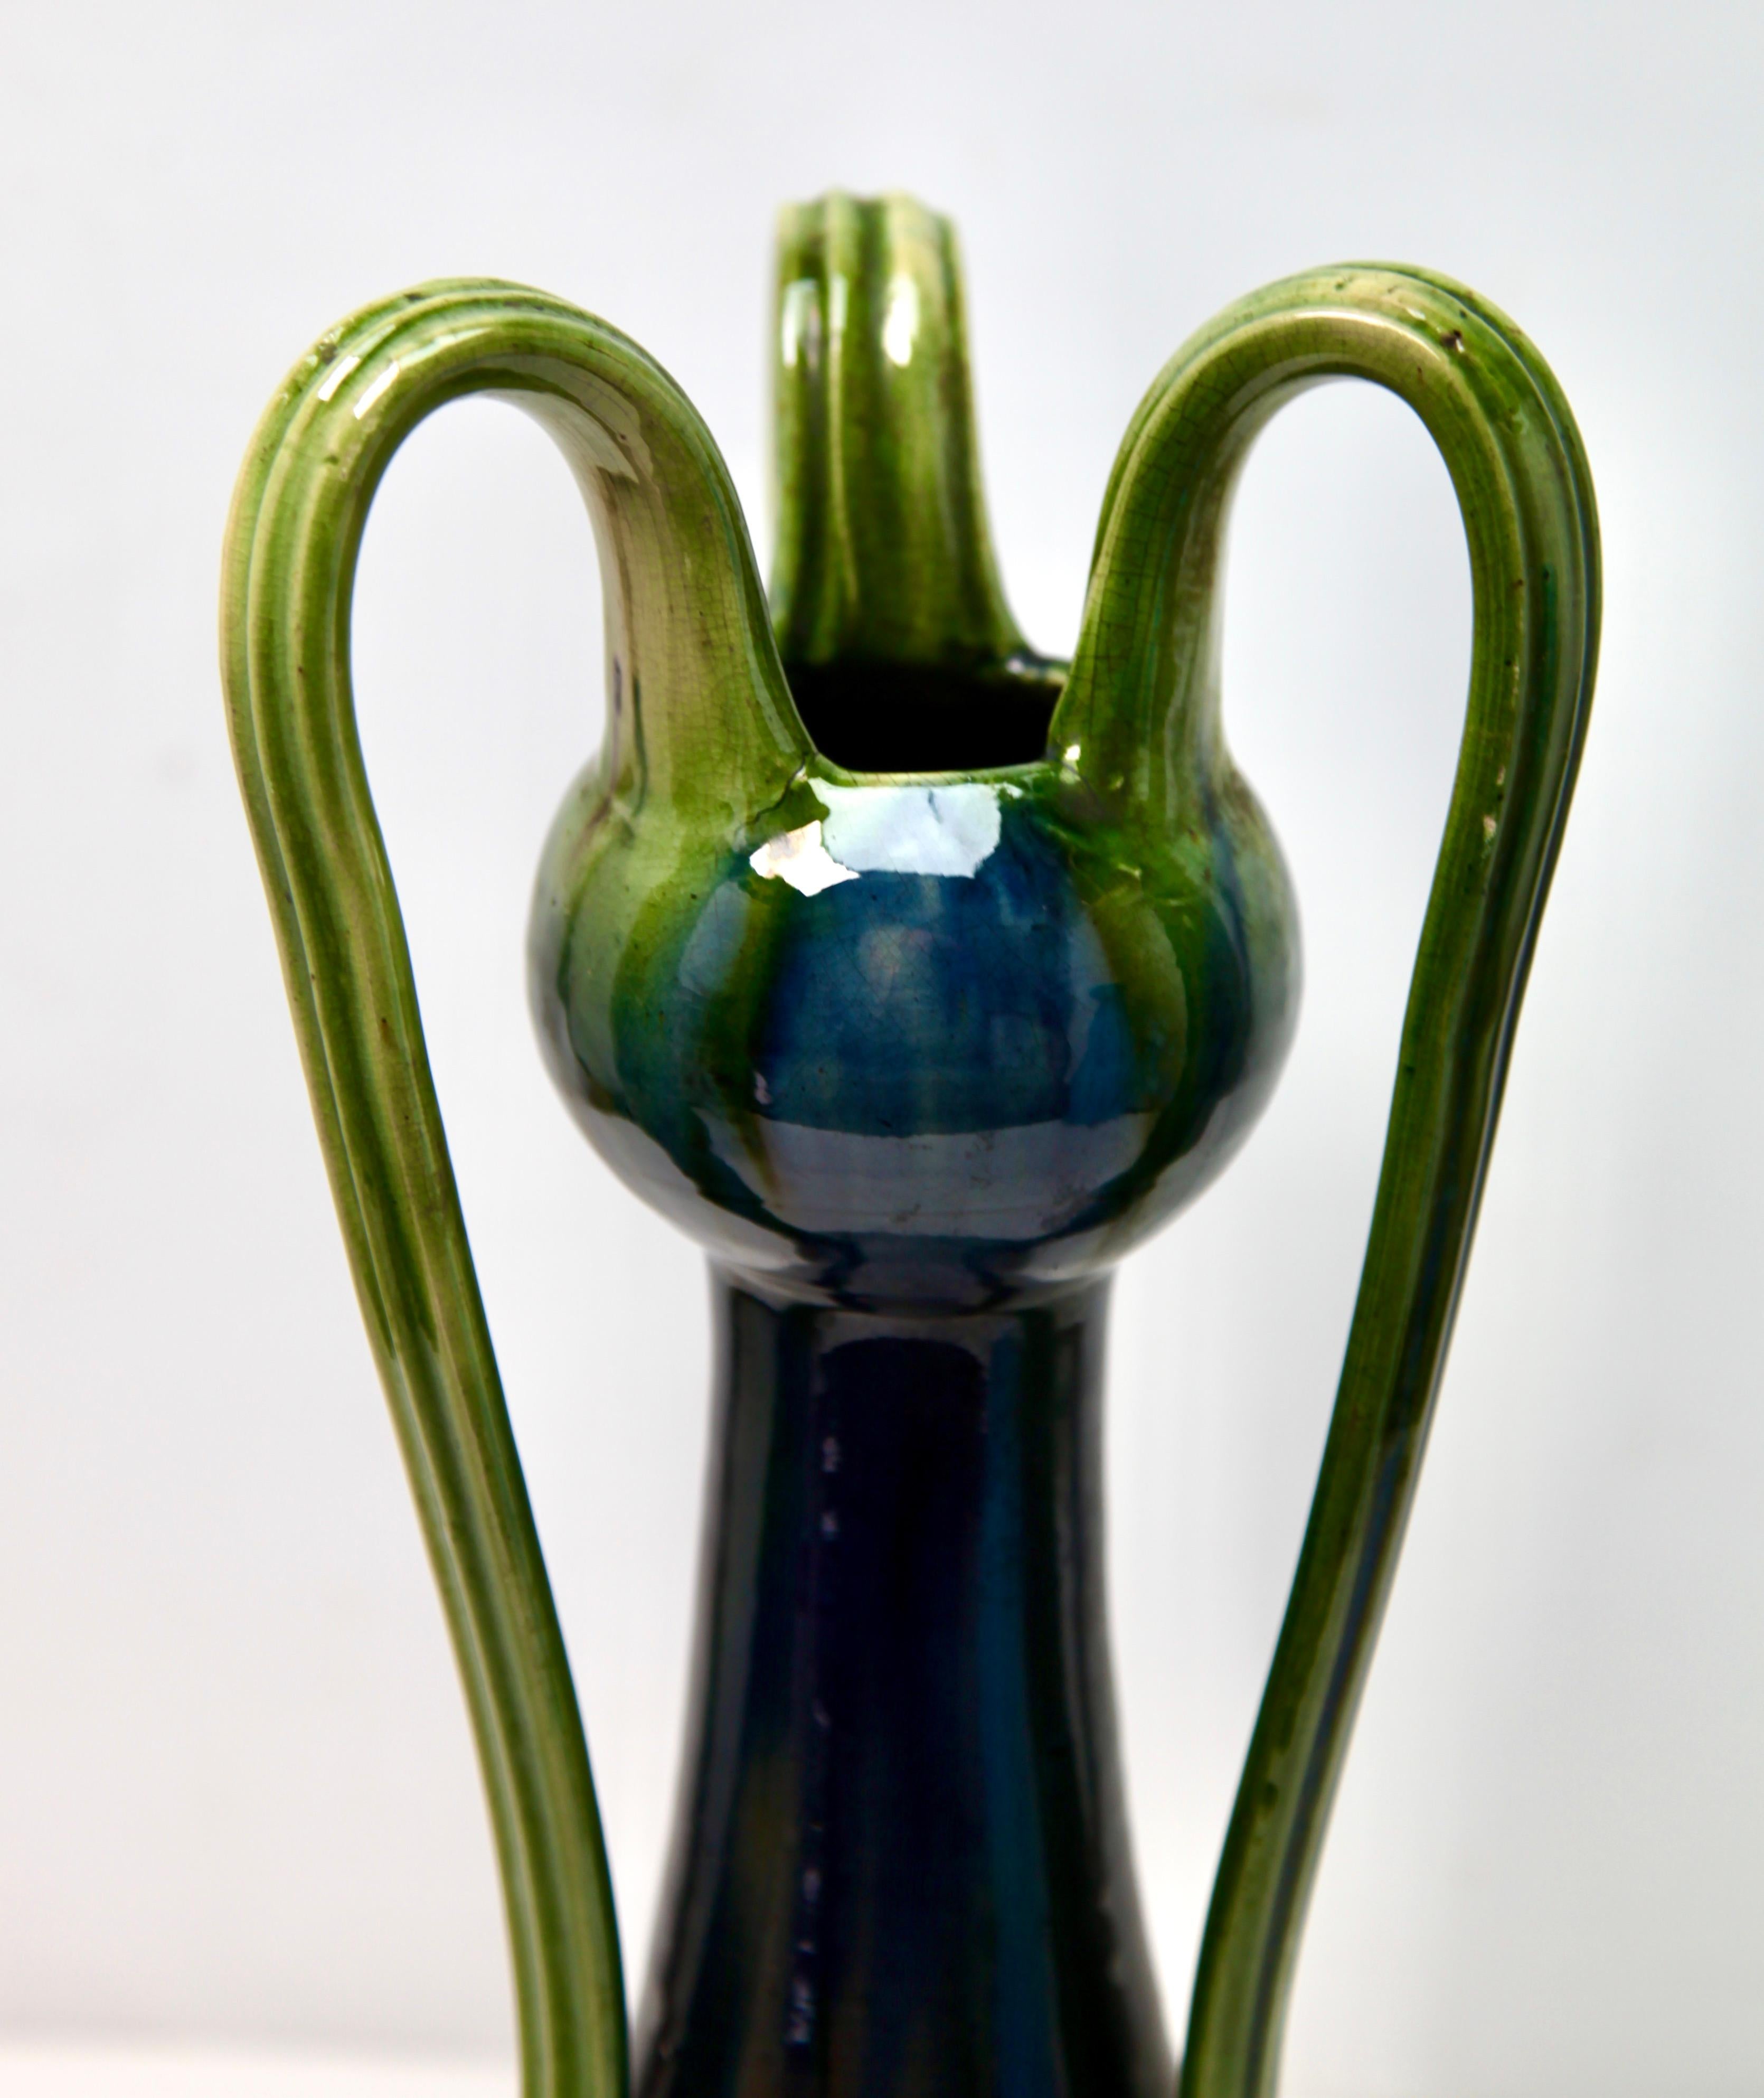 Mid-20th Century Art Nouveau Vase with 3 Handles with Controlled Drip Glazes in Blue and Green For Sale